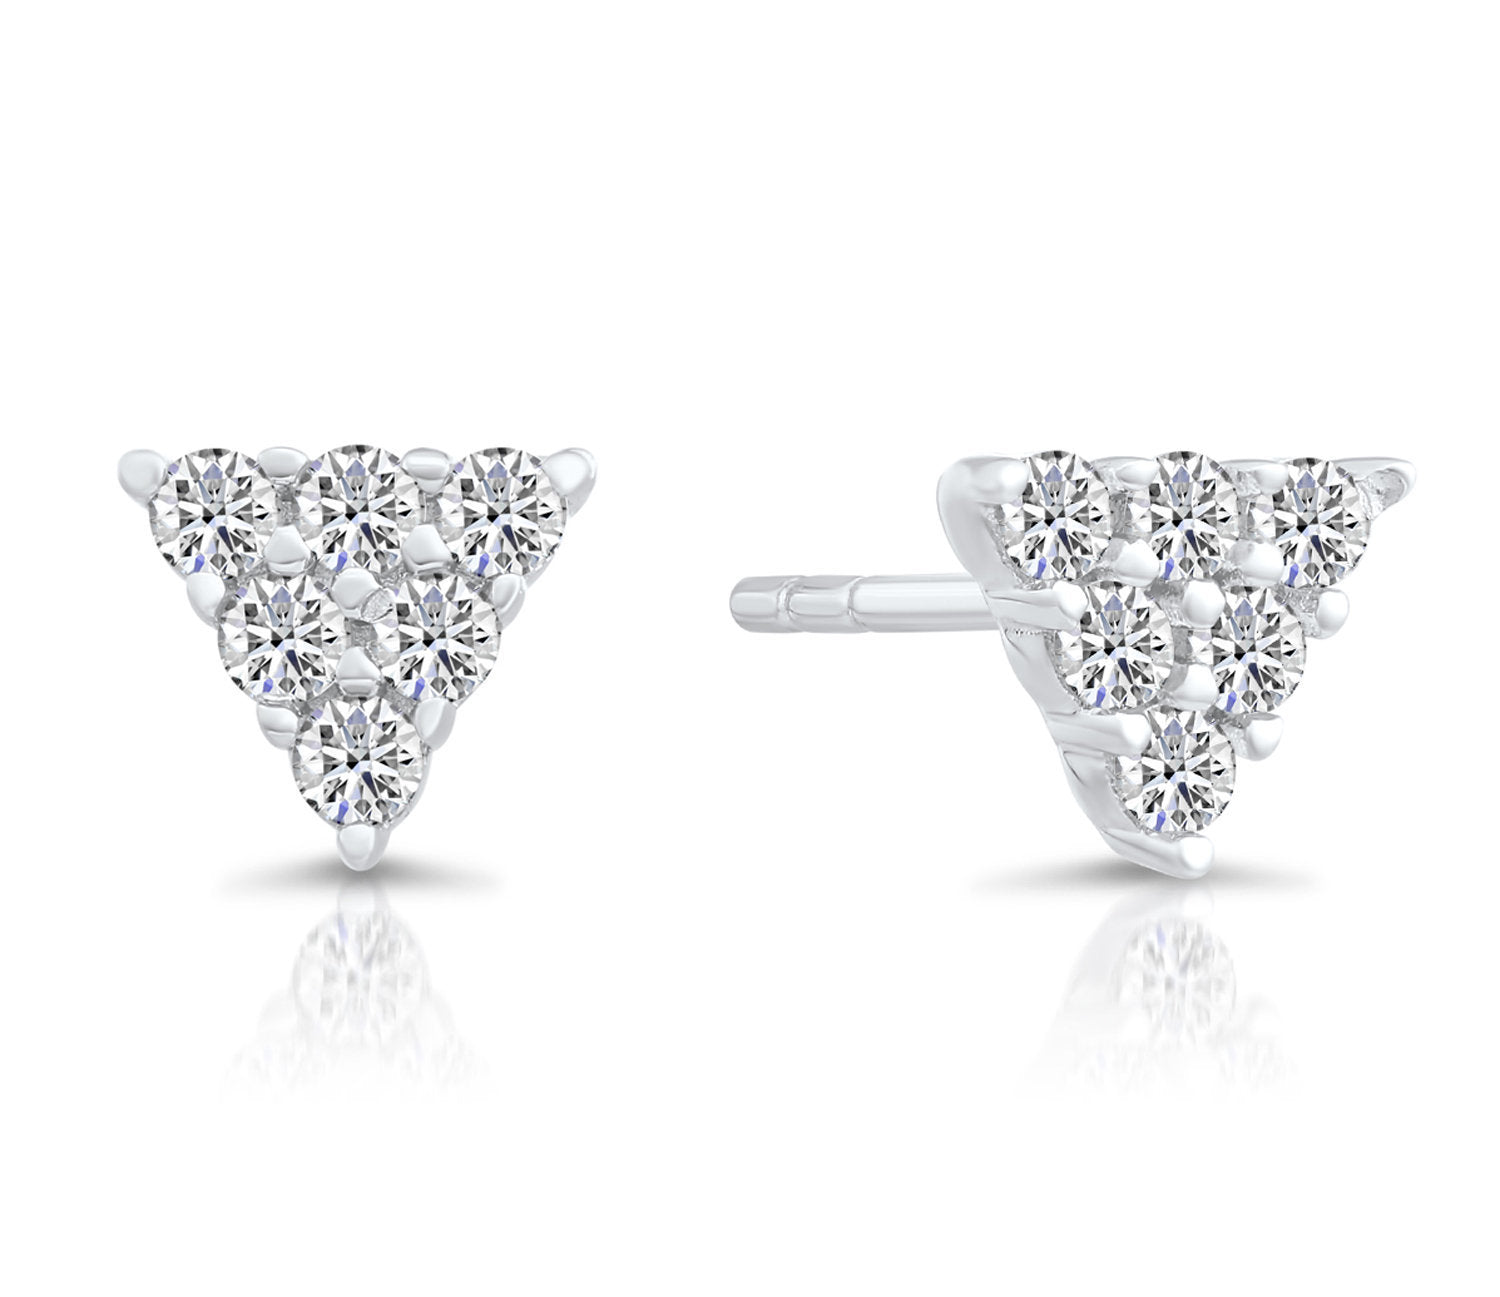 CZ Tiny Triangle Stud Earrings in Sterling Silver